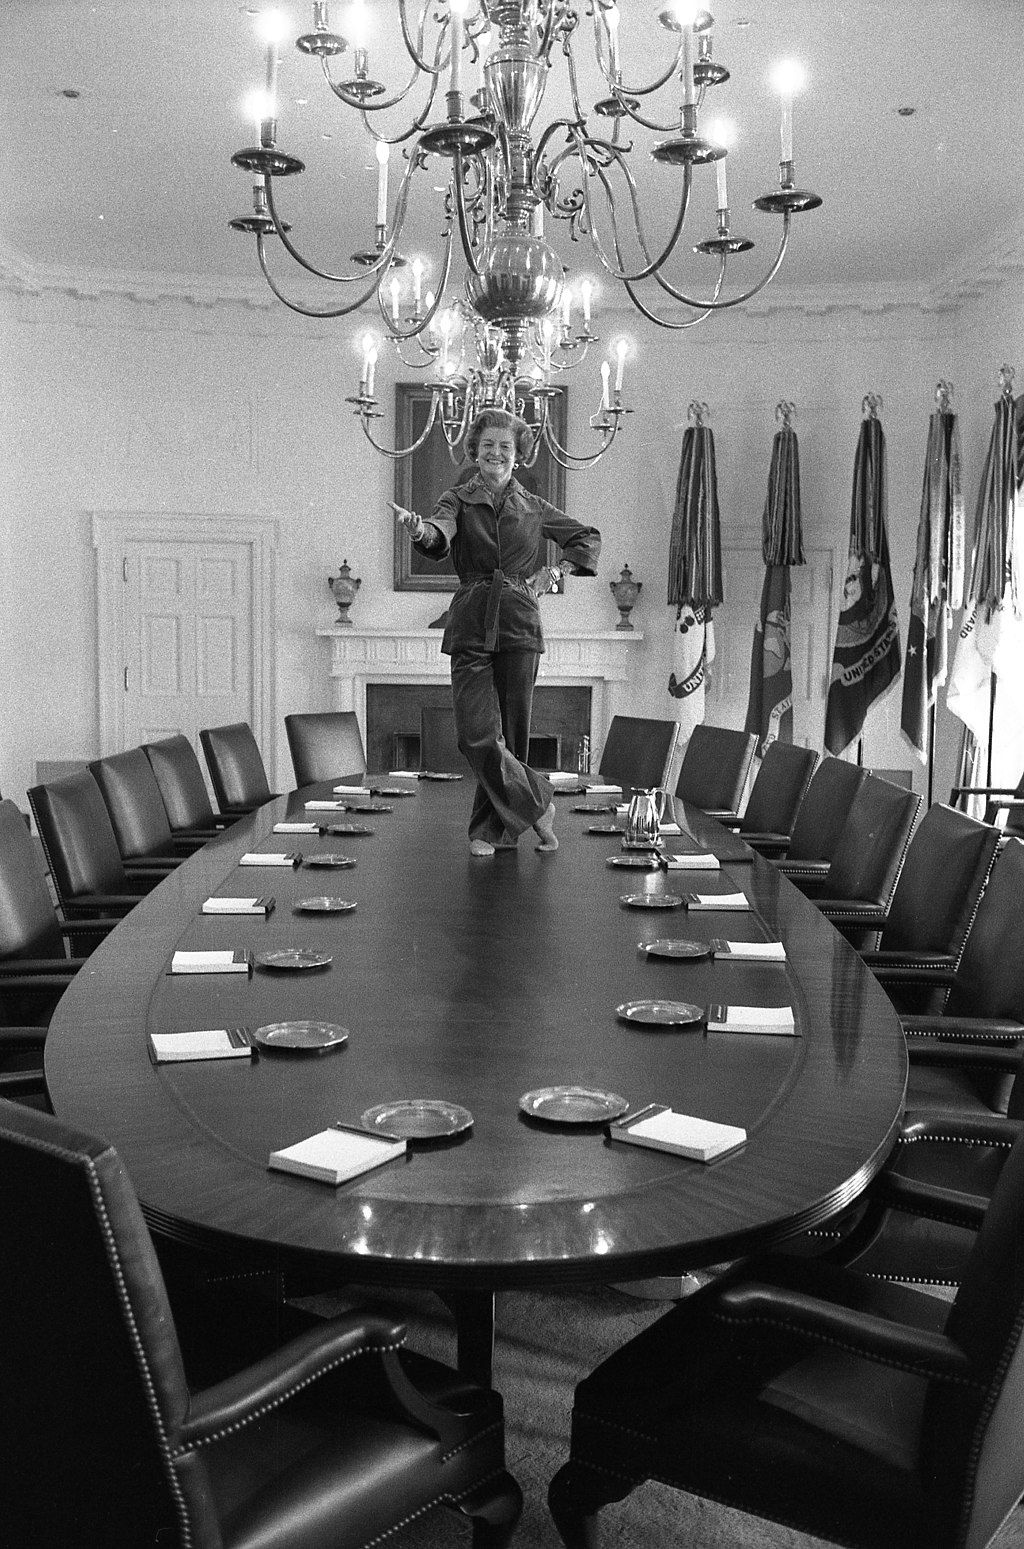 Betty Ford striking a pose on her last day in the White House